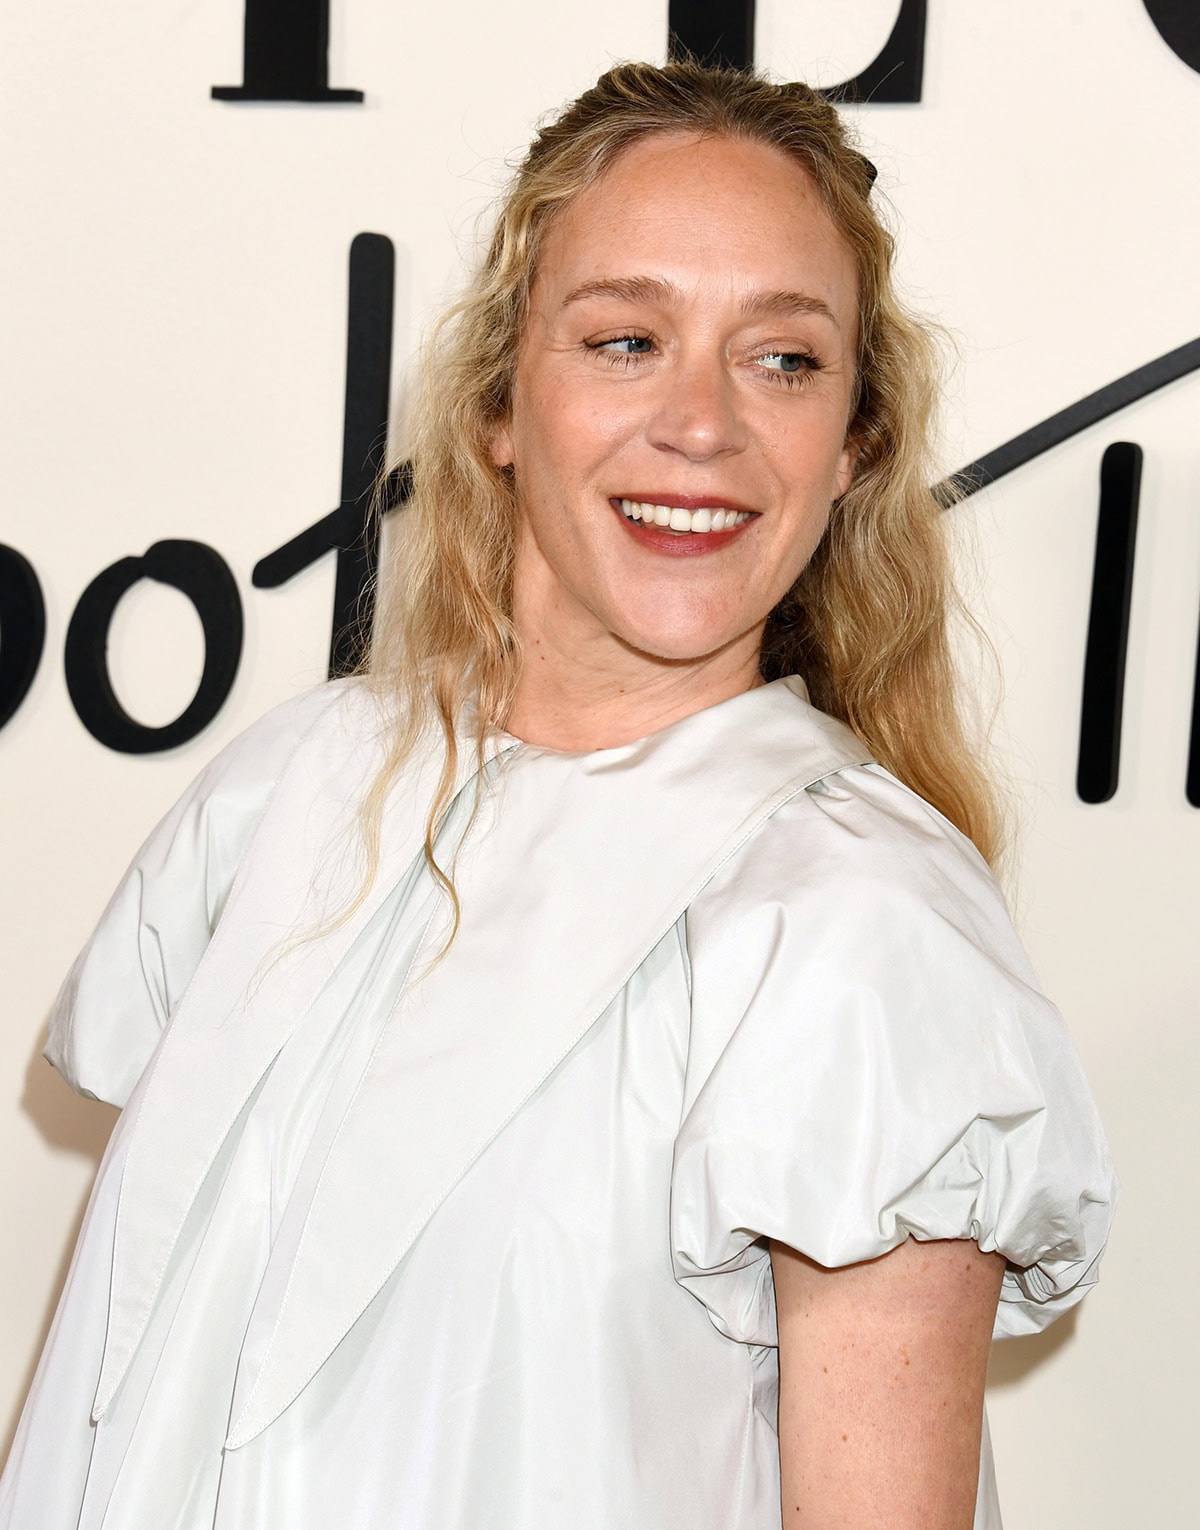 Chloe Sevigny adds a coquette element to her whimsical look by styling her long curly tresses with a black bow